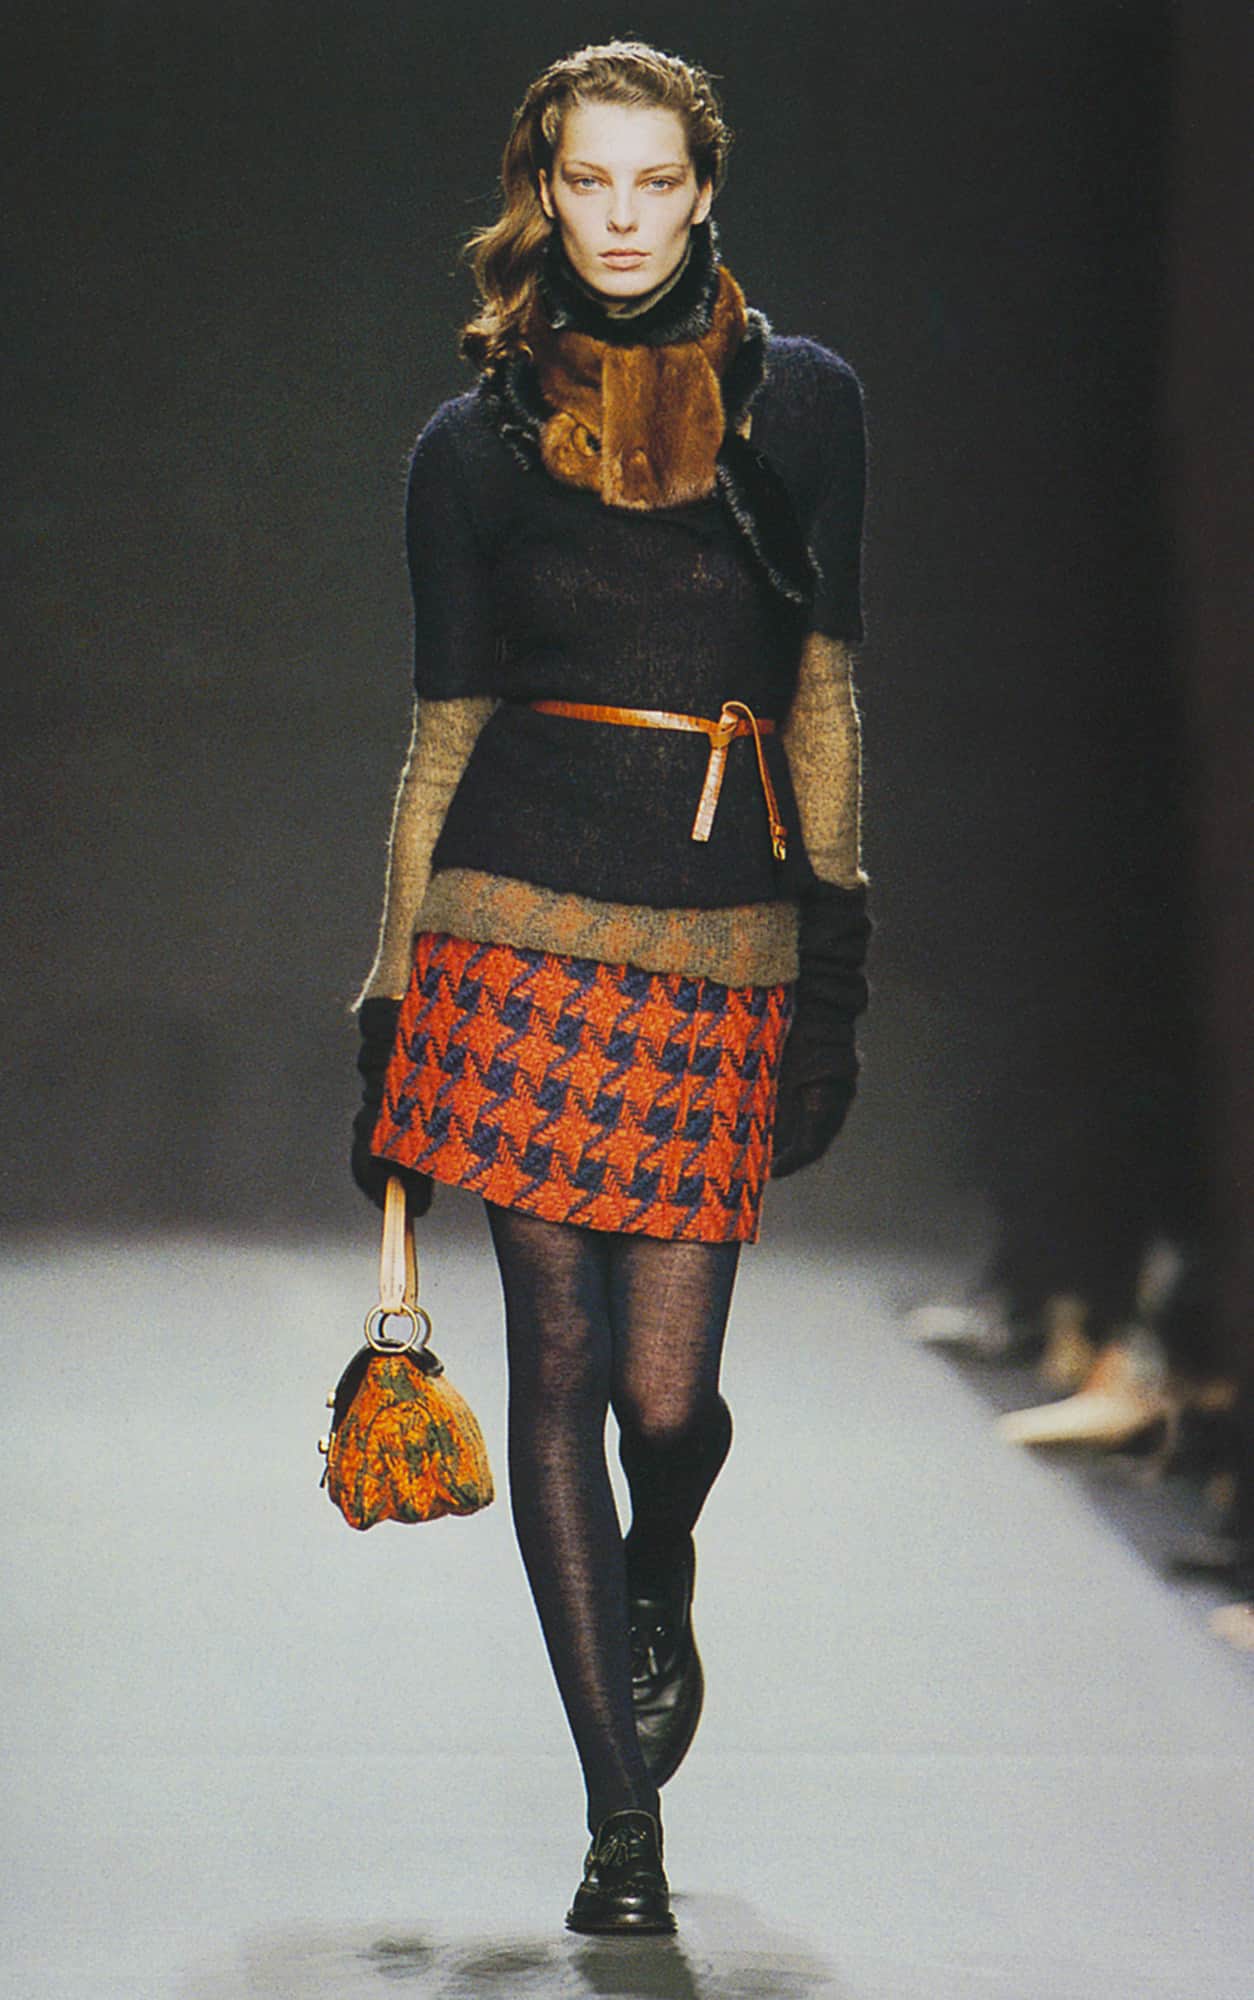 Miu Miu's Entire Image Archive Is Now Available Online